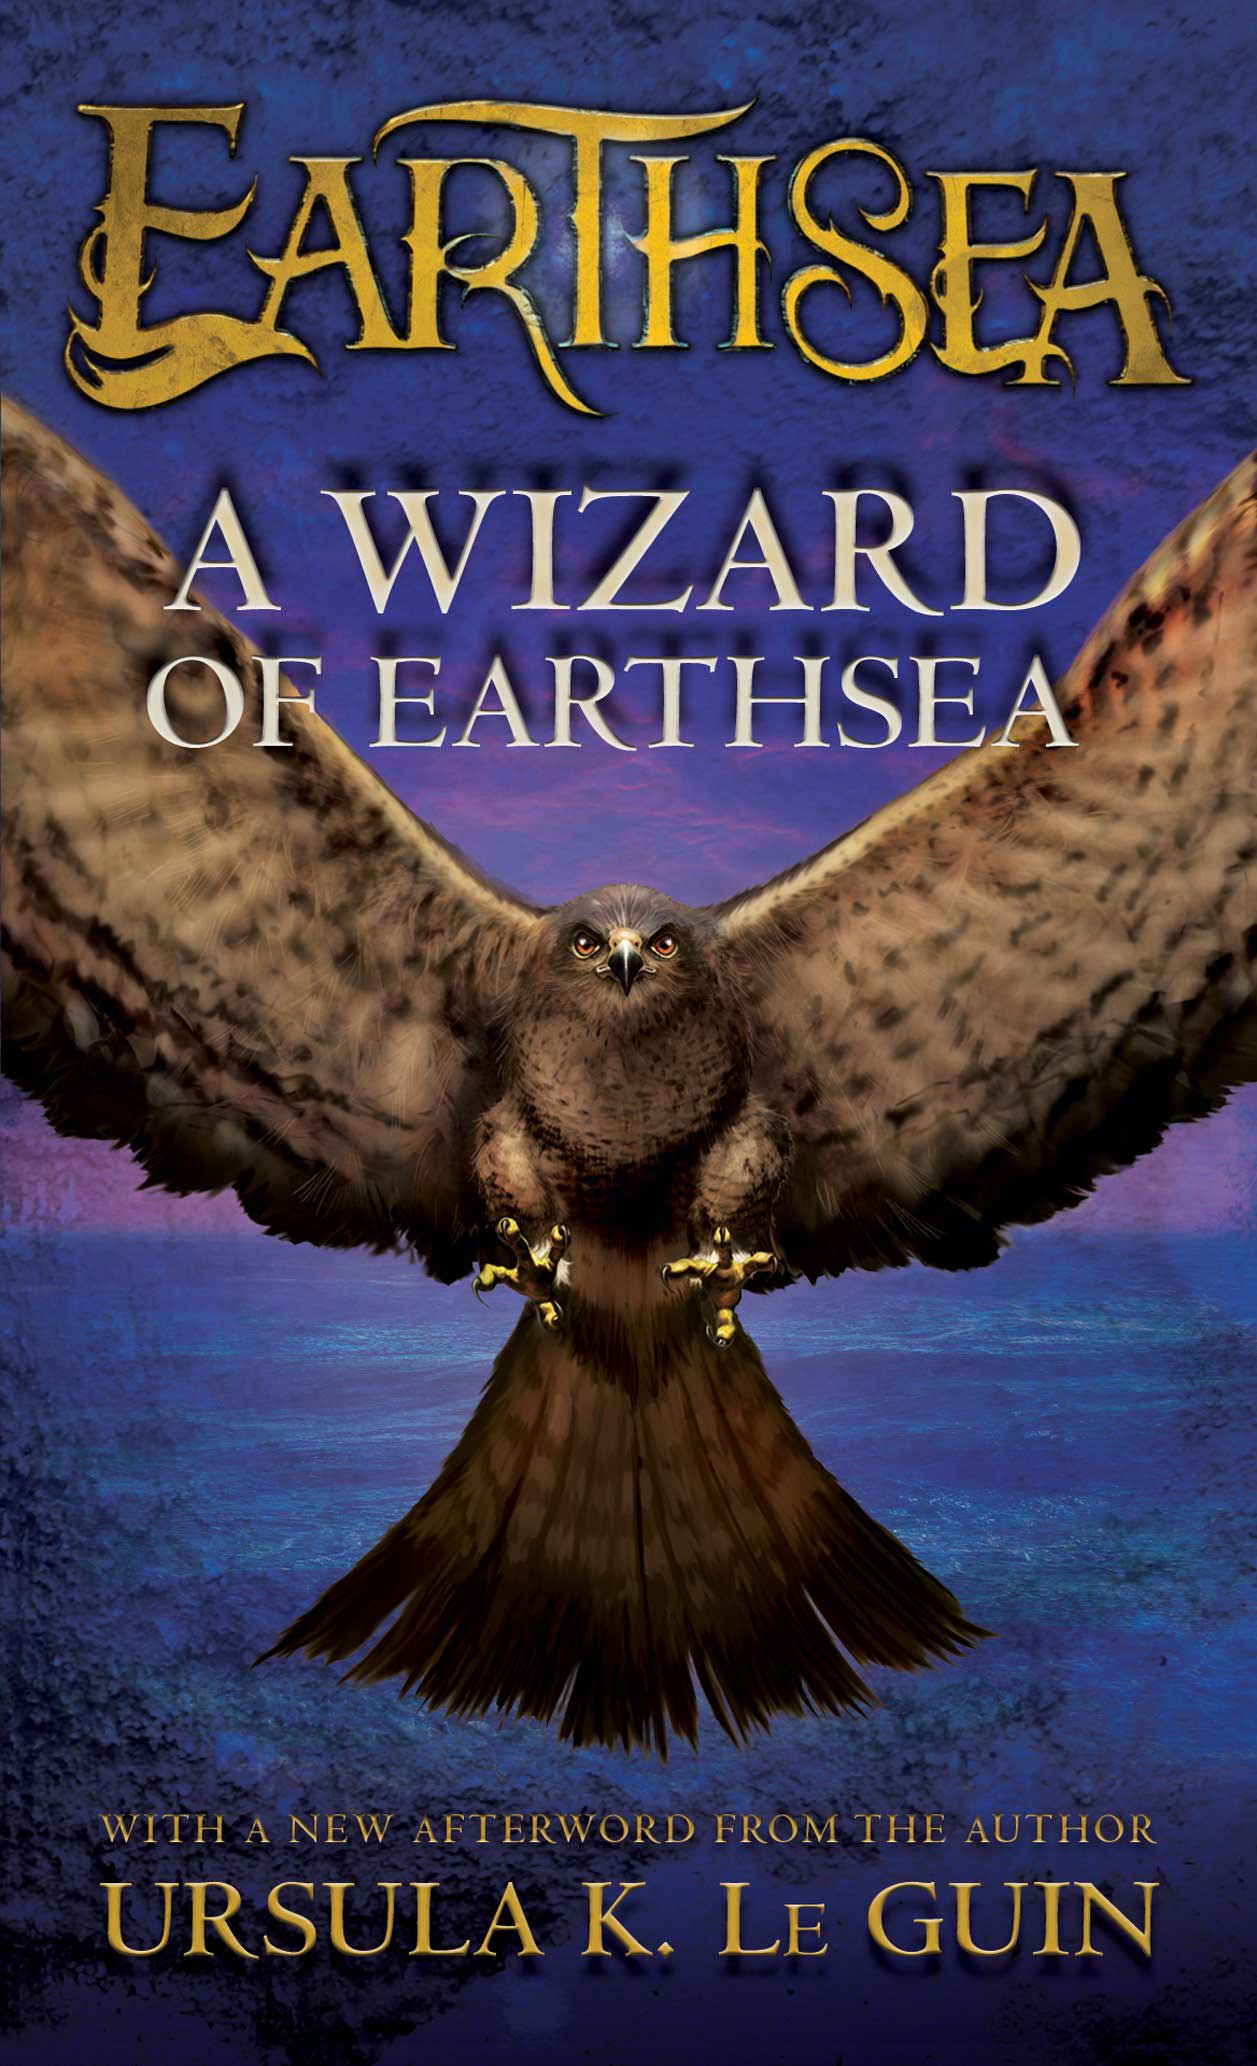 A Wizard of Earthsea, by Ursula K. Le Guin.
                              
                              
                              
                              The first novel in the Earthsea series, the book follows the adventures of Ged in his youth before he became Earthesea’s greatest sorcerer.
                              
                              
                              
                              Buy now: A Wizard of Earthsea